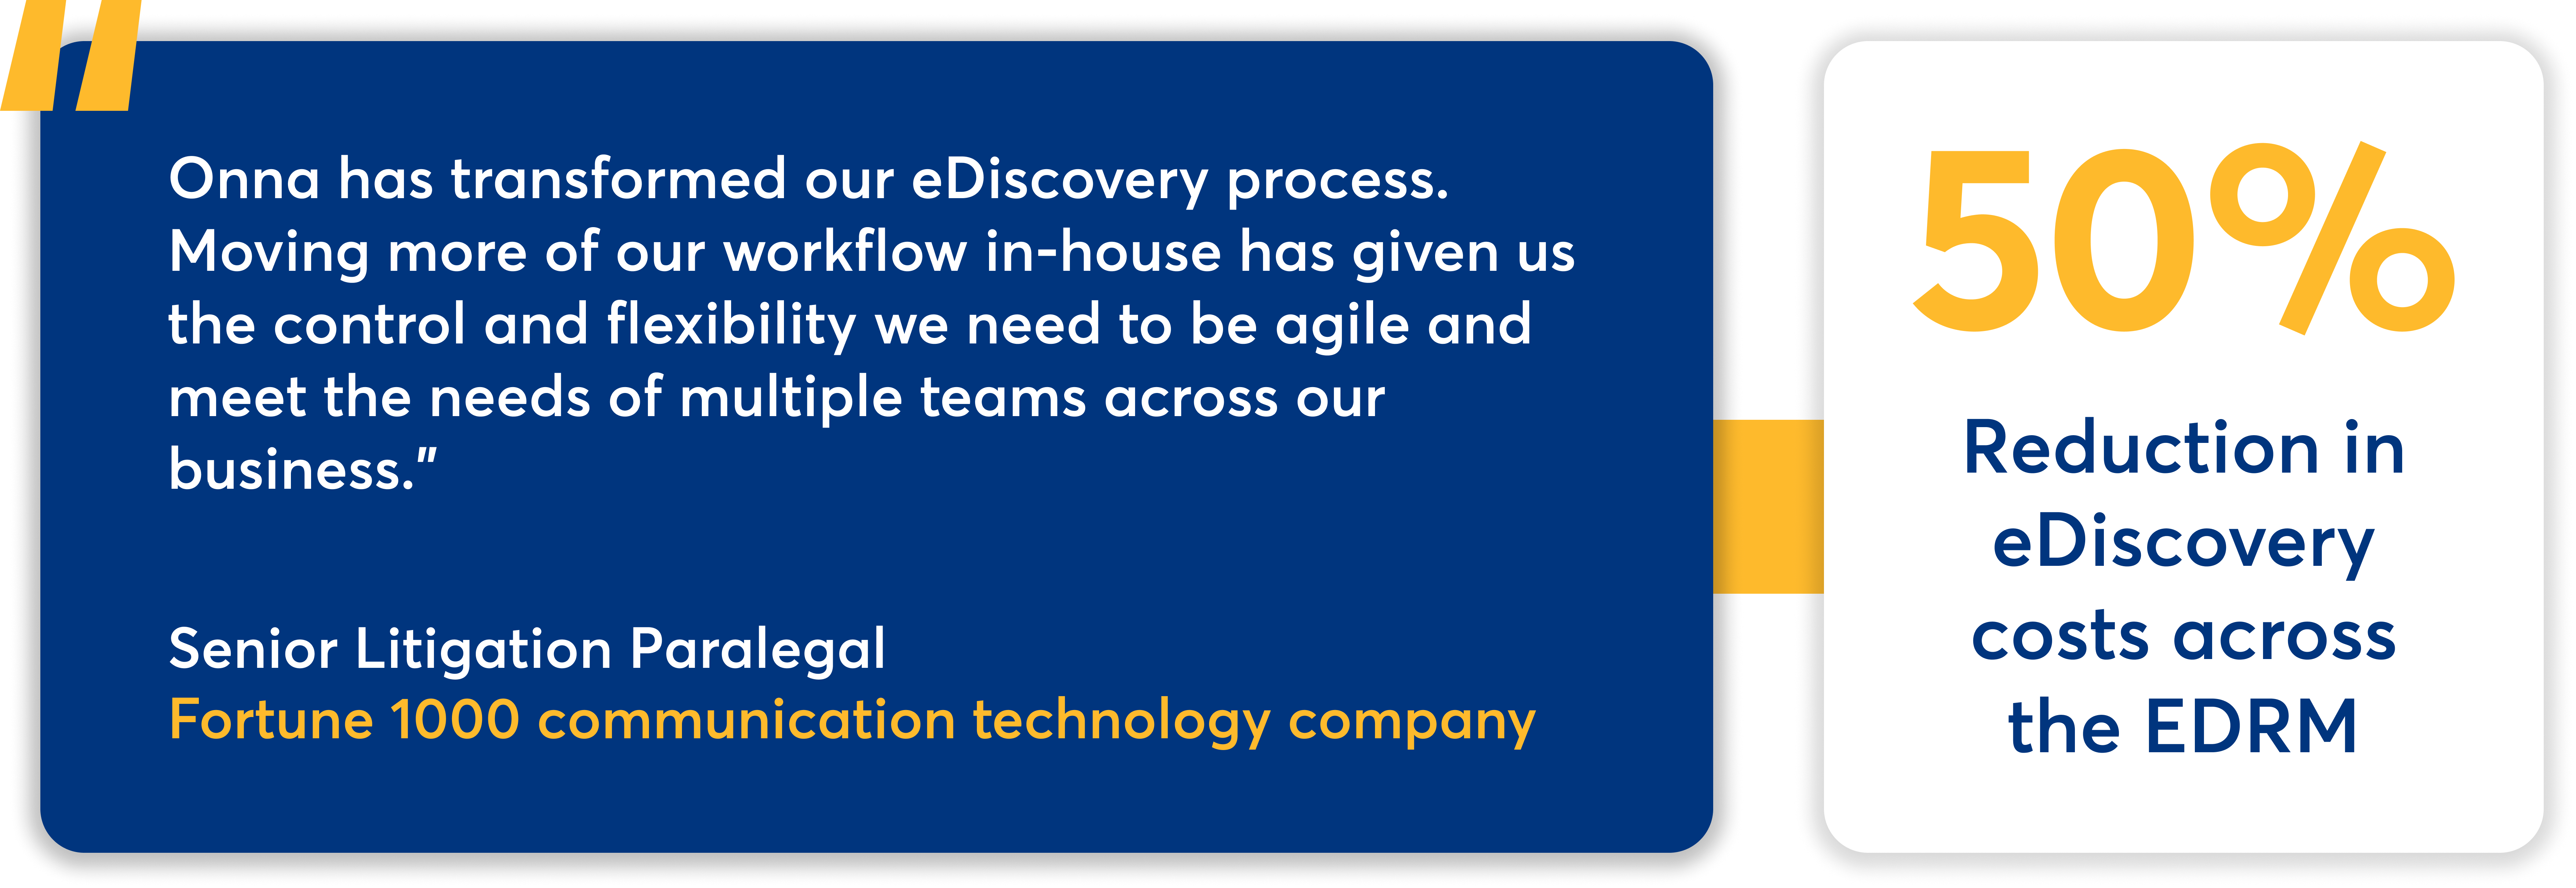 A quote from a Senior Litigation Paralegal about Onna transforming eDiscovery and reducing costs by 50%.